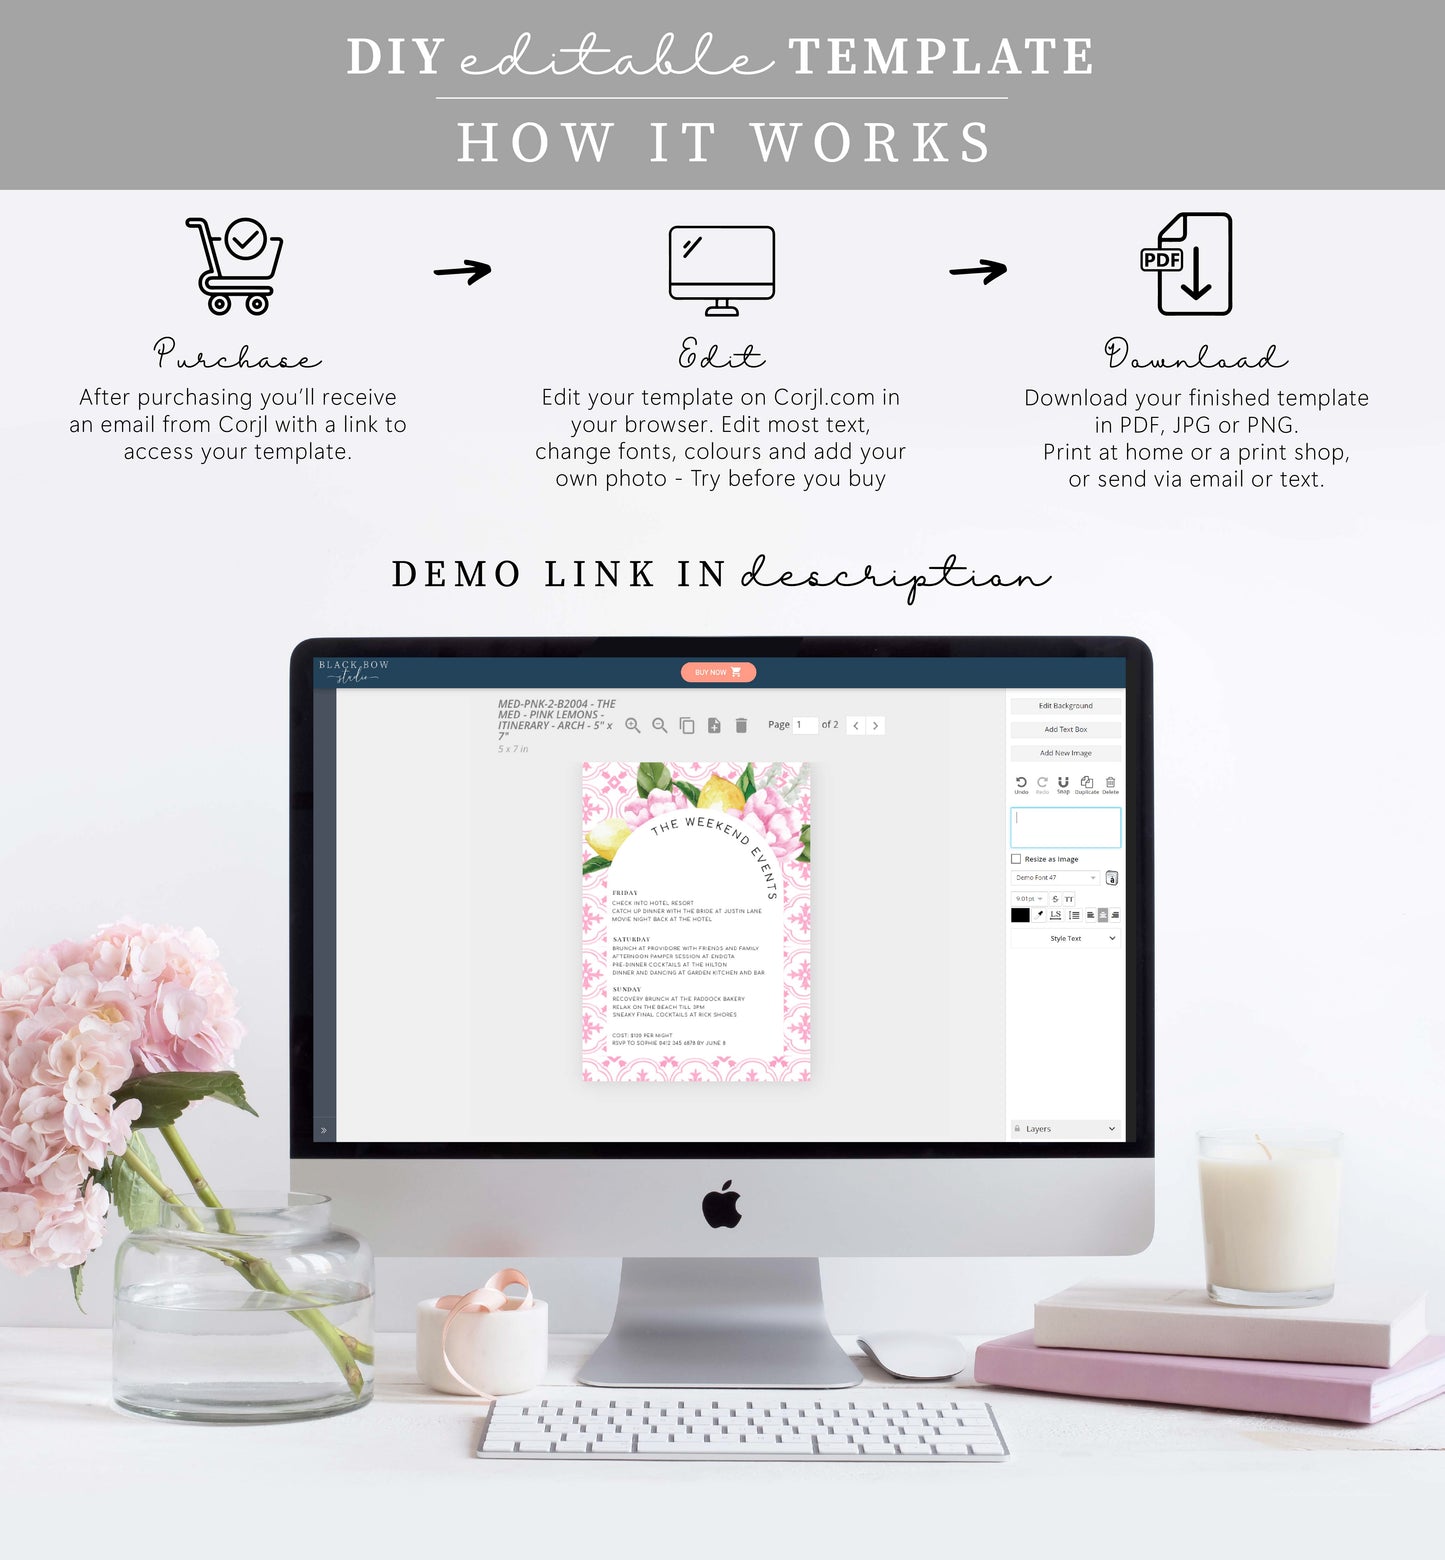 The Med Arch Pink Lemons | Printable Itinerary Template